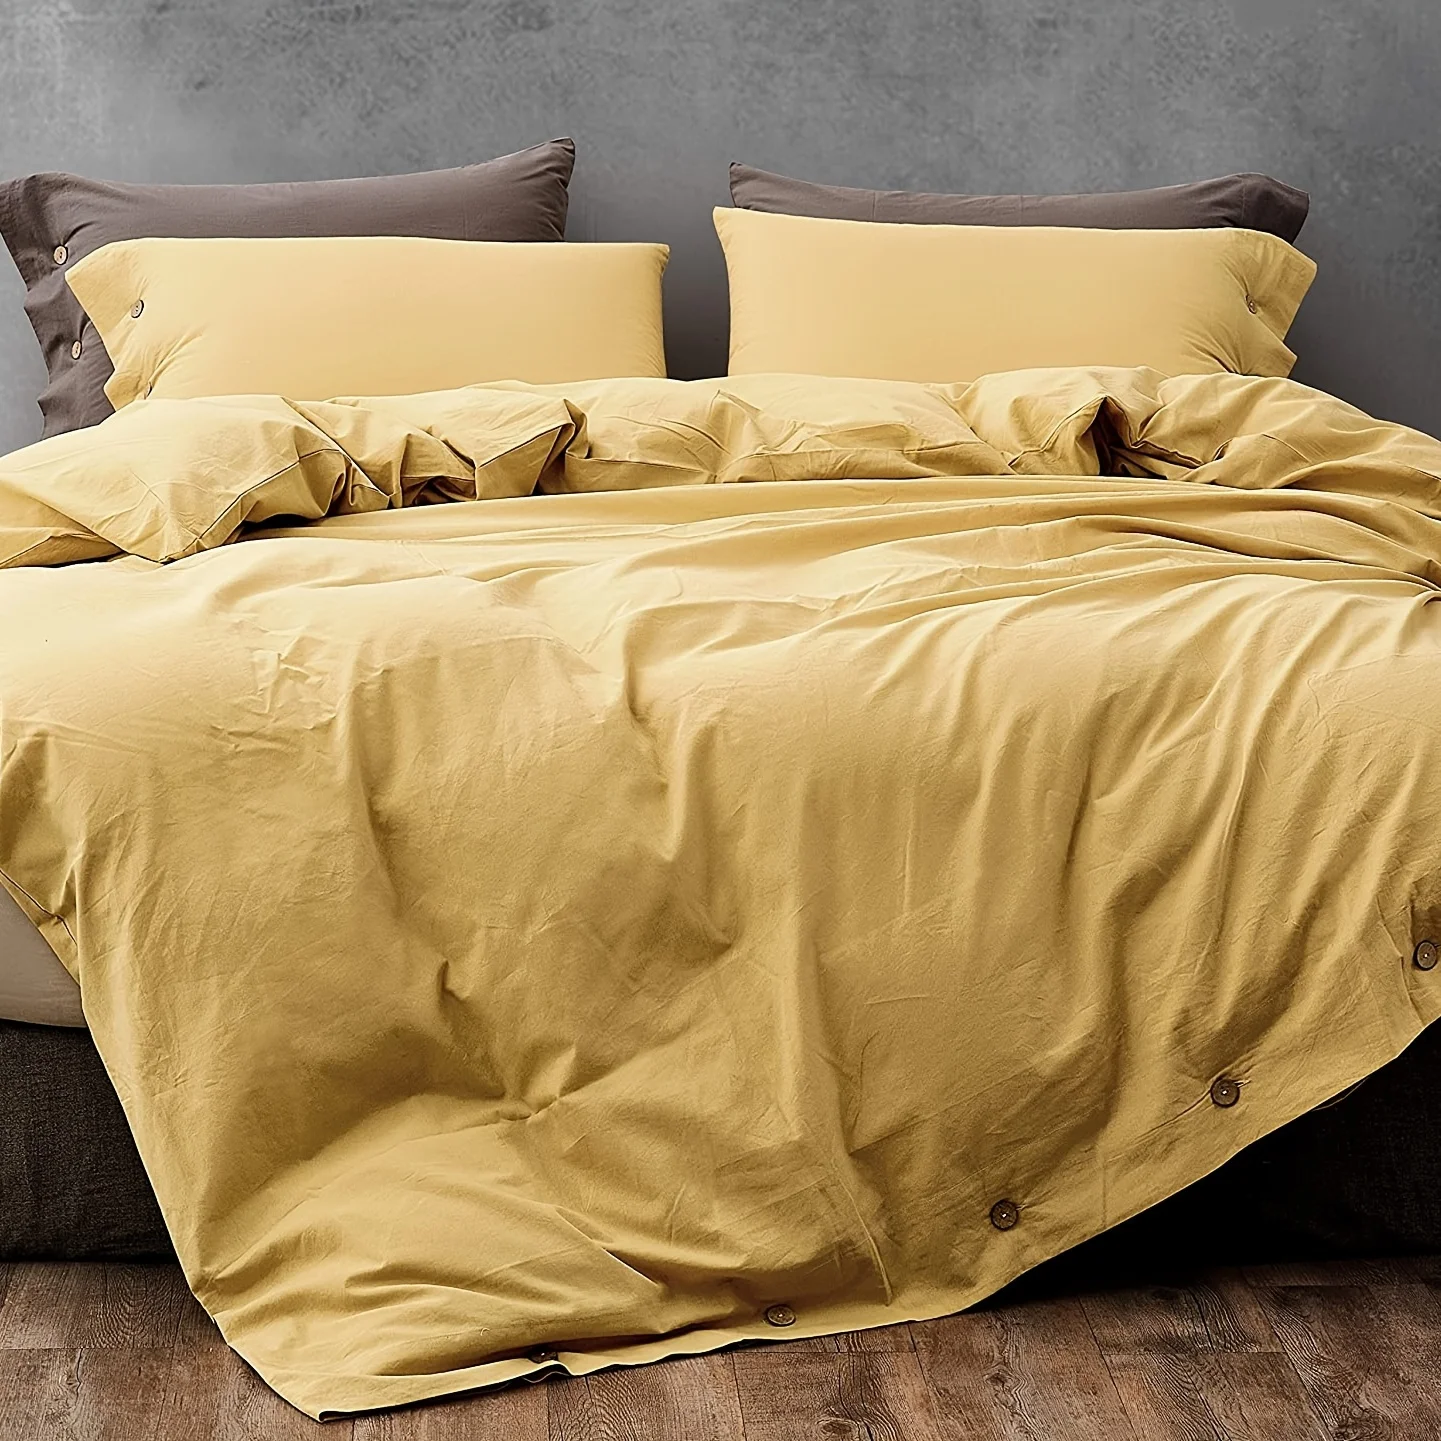 

3pcs Washed Cotton Duvet Cover Set - Mustard Yellow Comforter Cover Set, Soft, Cooling, Breathable Bedding Collection With Butto